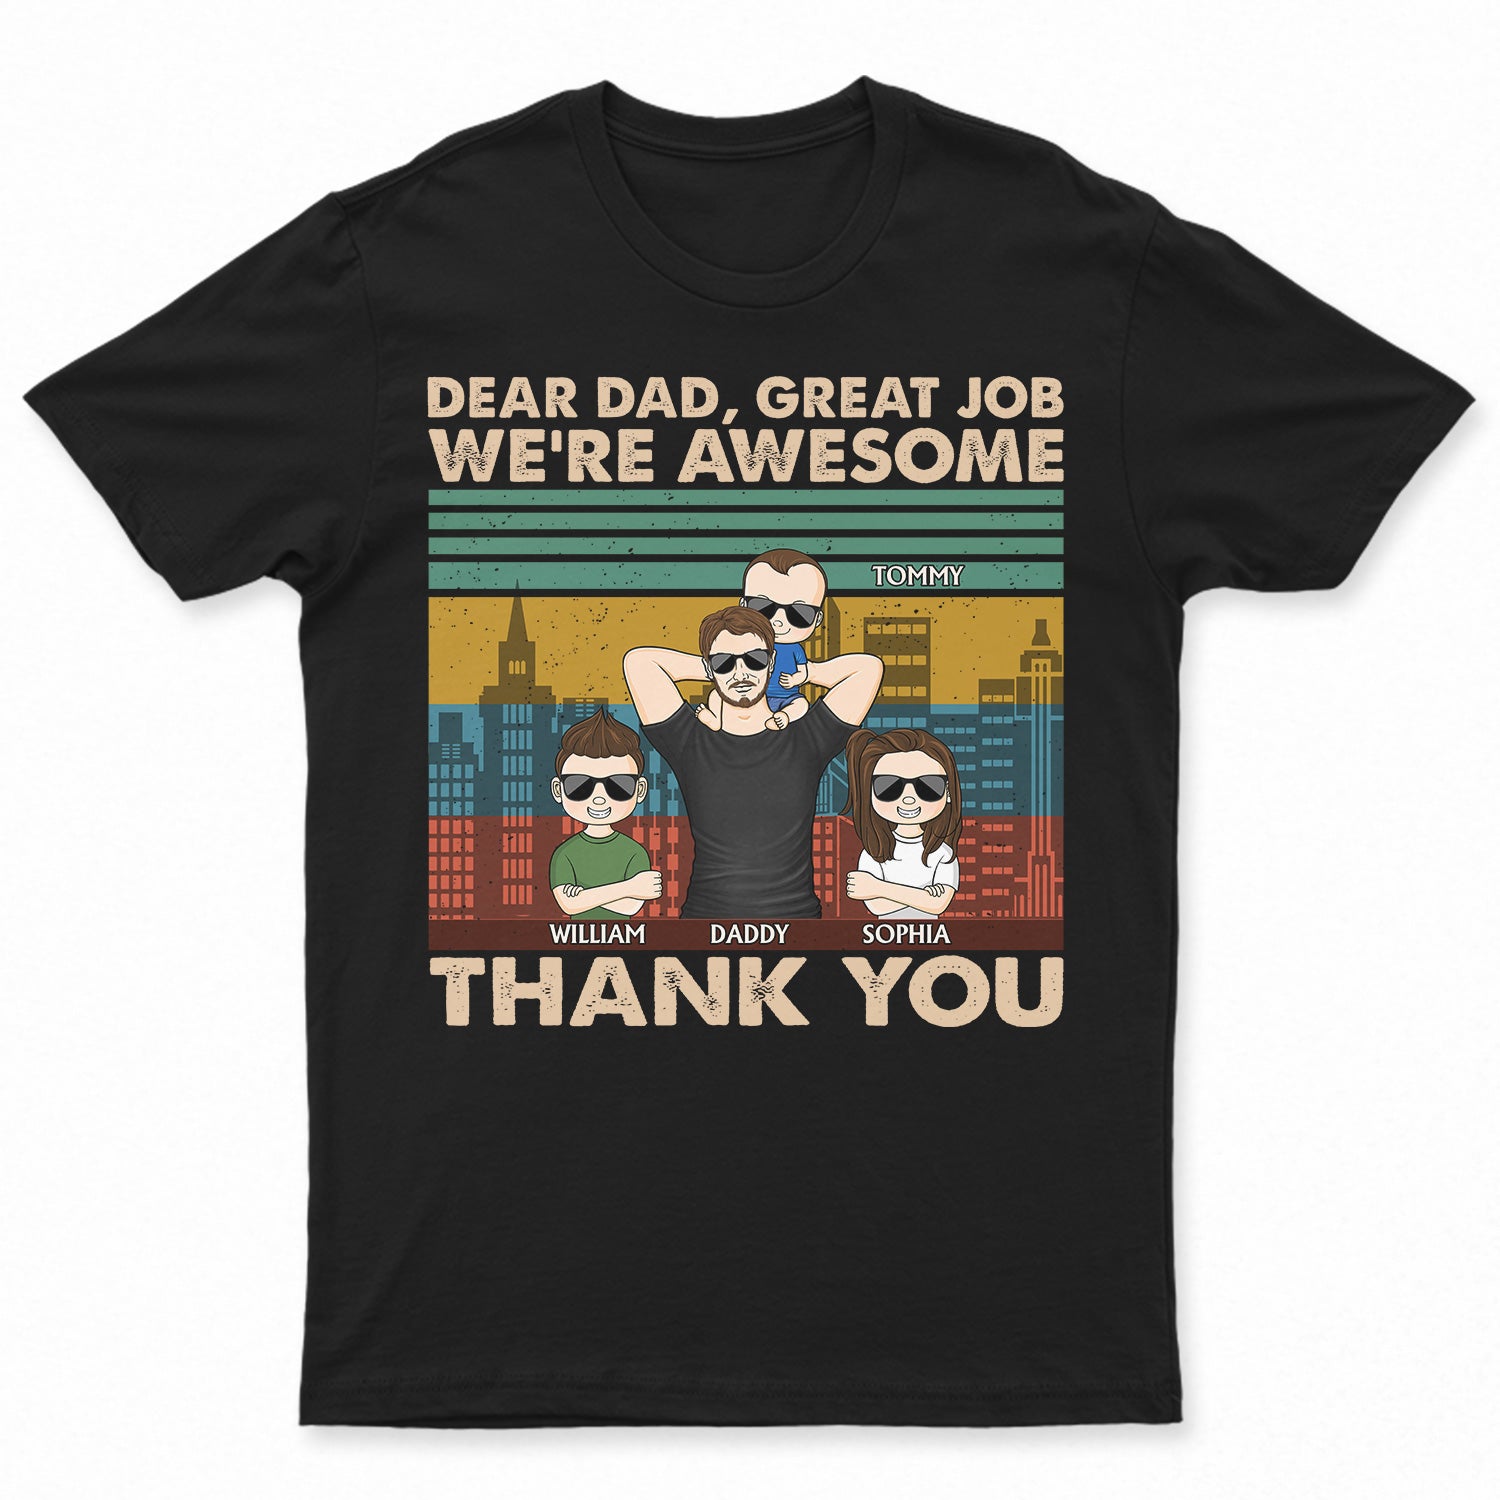 Dear Dad Great Job We're Awesome - Birthday Gift For Father, Family - Personalized Custom T Shirt